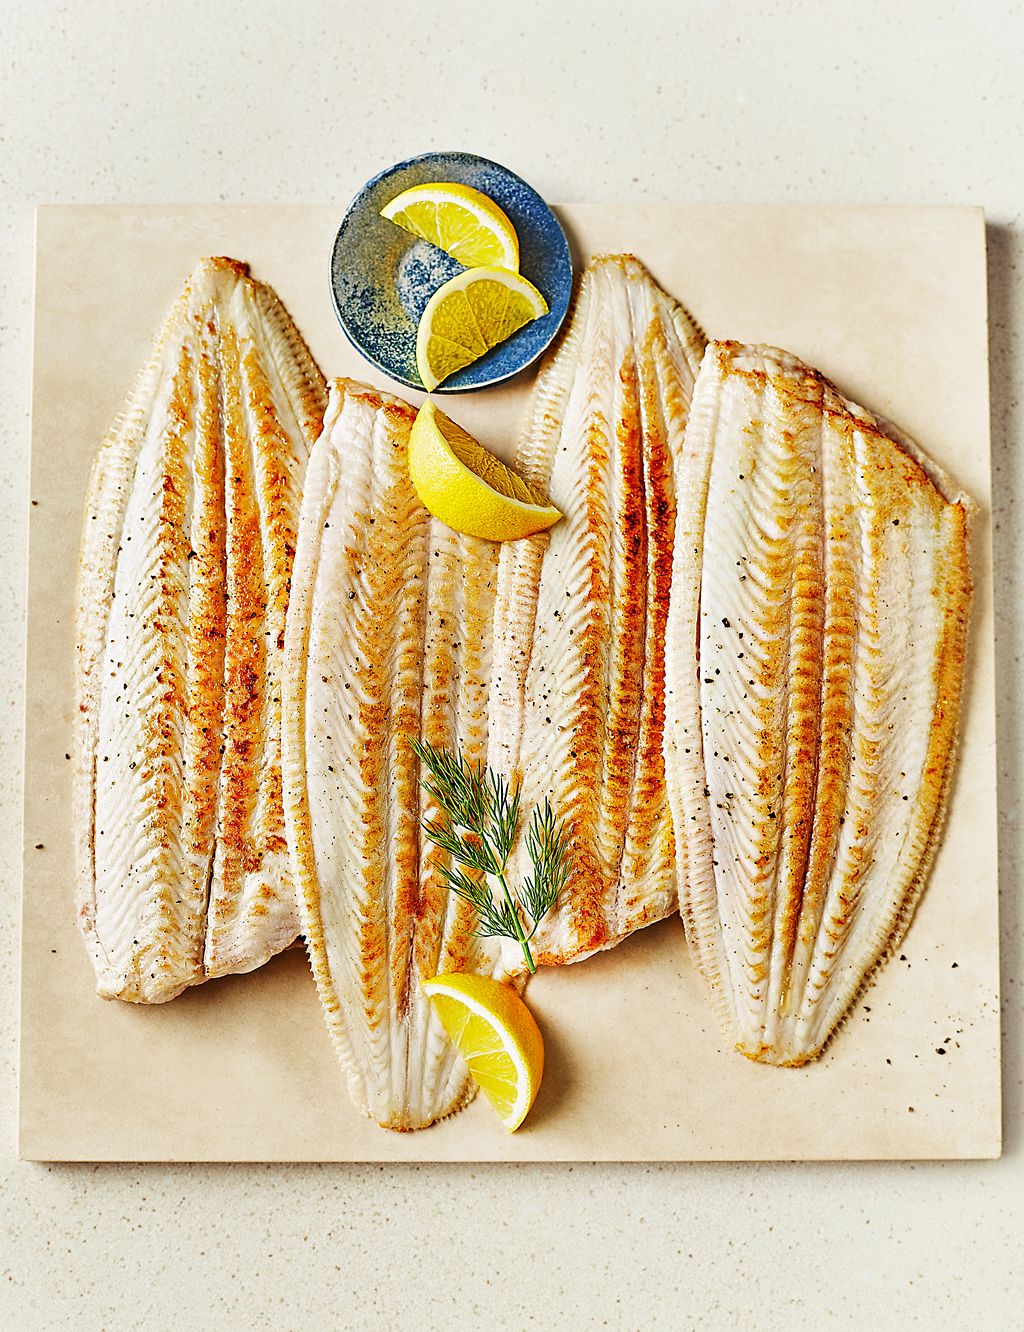 Dover Sole (4 Pieces) - (Last Collection Date 30th September 2020) 3 of 3